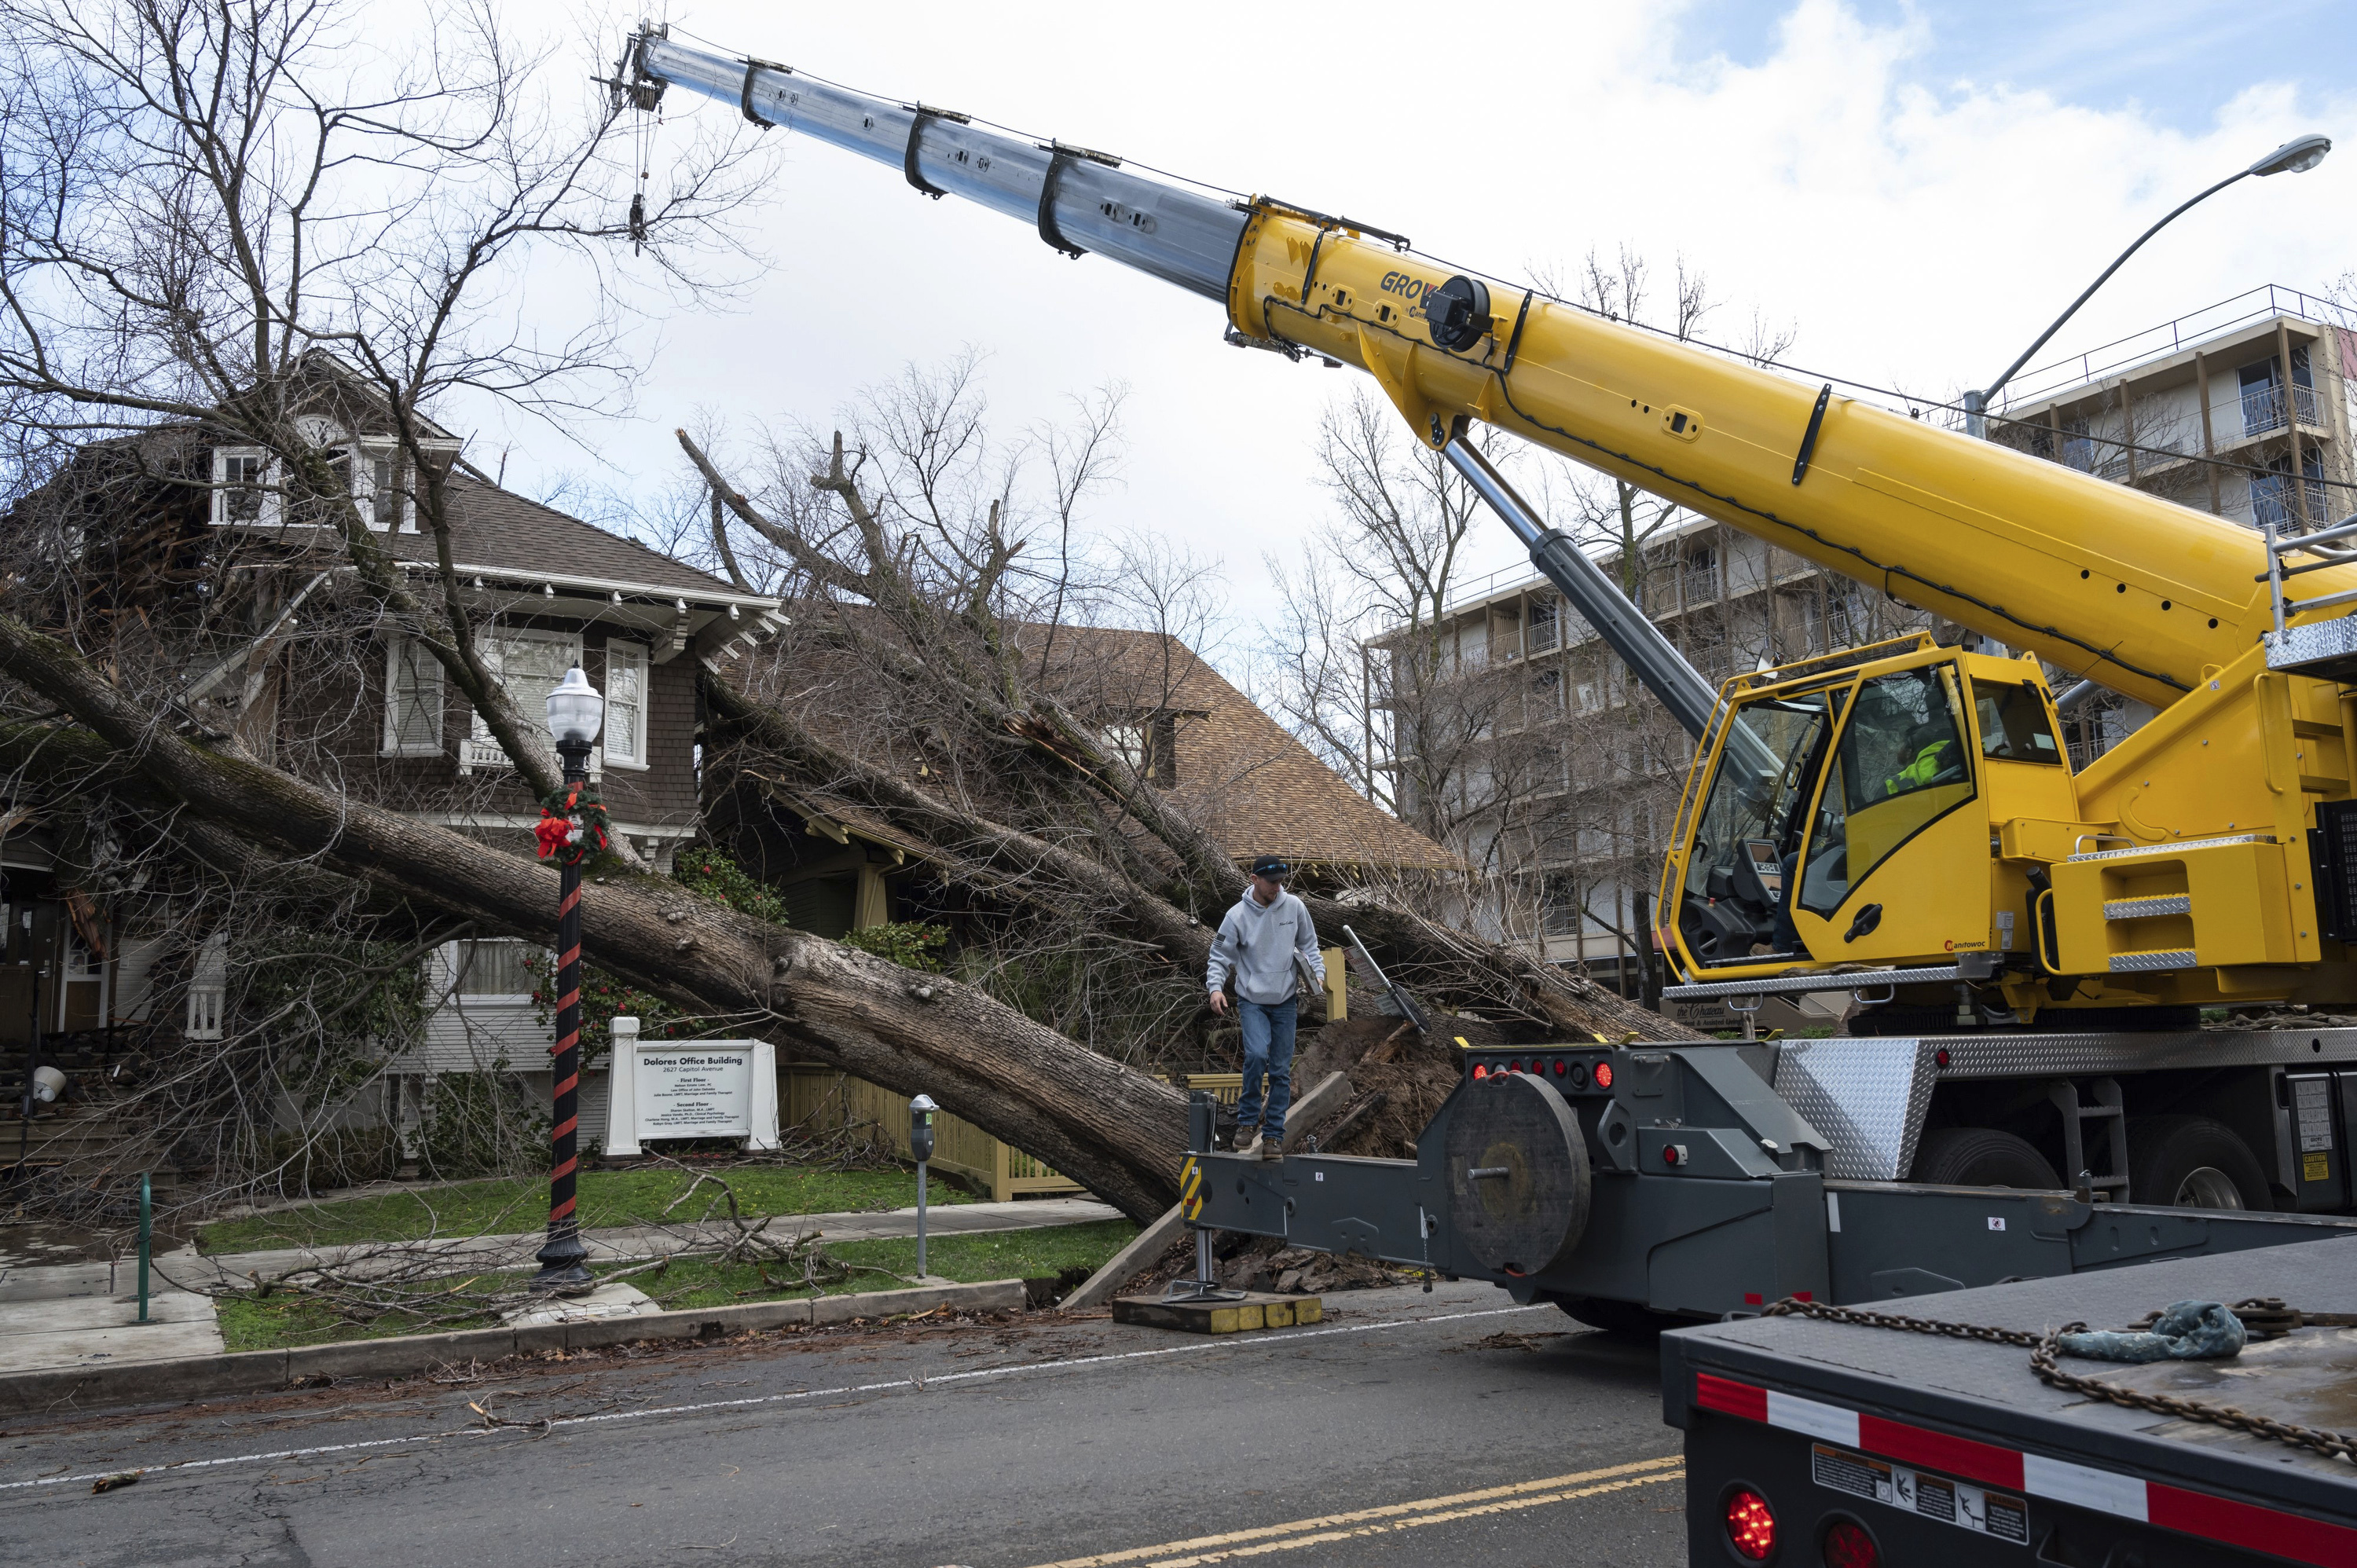 Crane operator Ricky Kapuschinsky, with AAA Crane, prepares to lift uprooted trees at Capitol Avenue and 27th Street in downtown after a storm brought high winds overnight in Sacramento, California.  (Sara Nevis/The Sacramento Bee via AP)